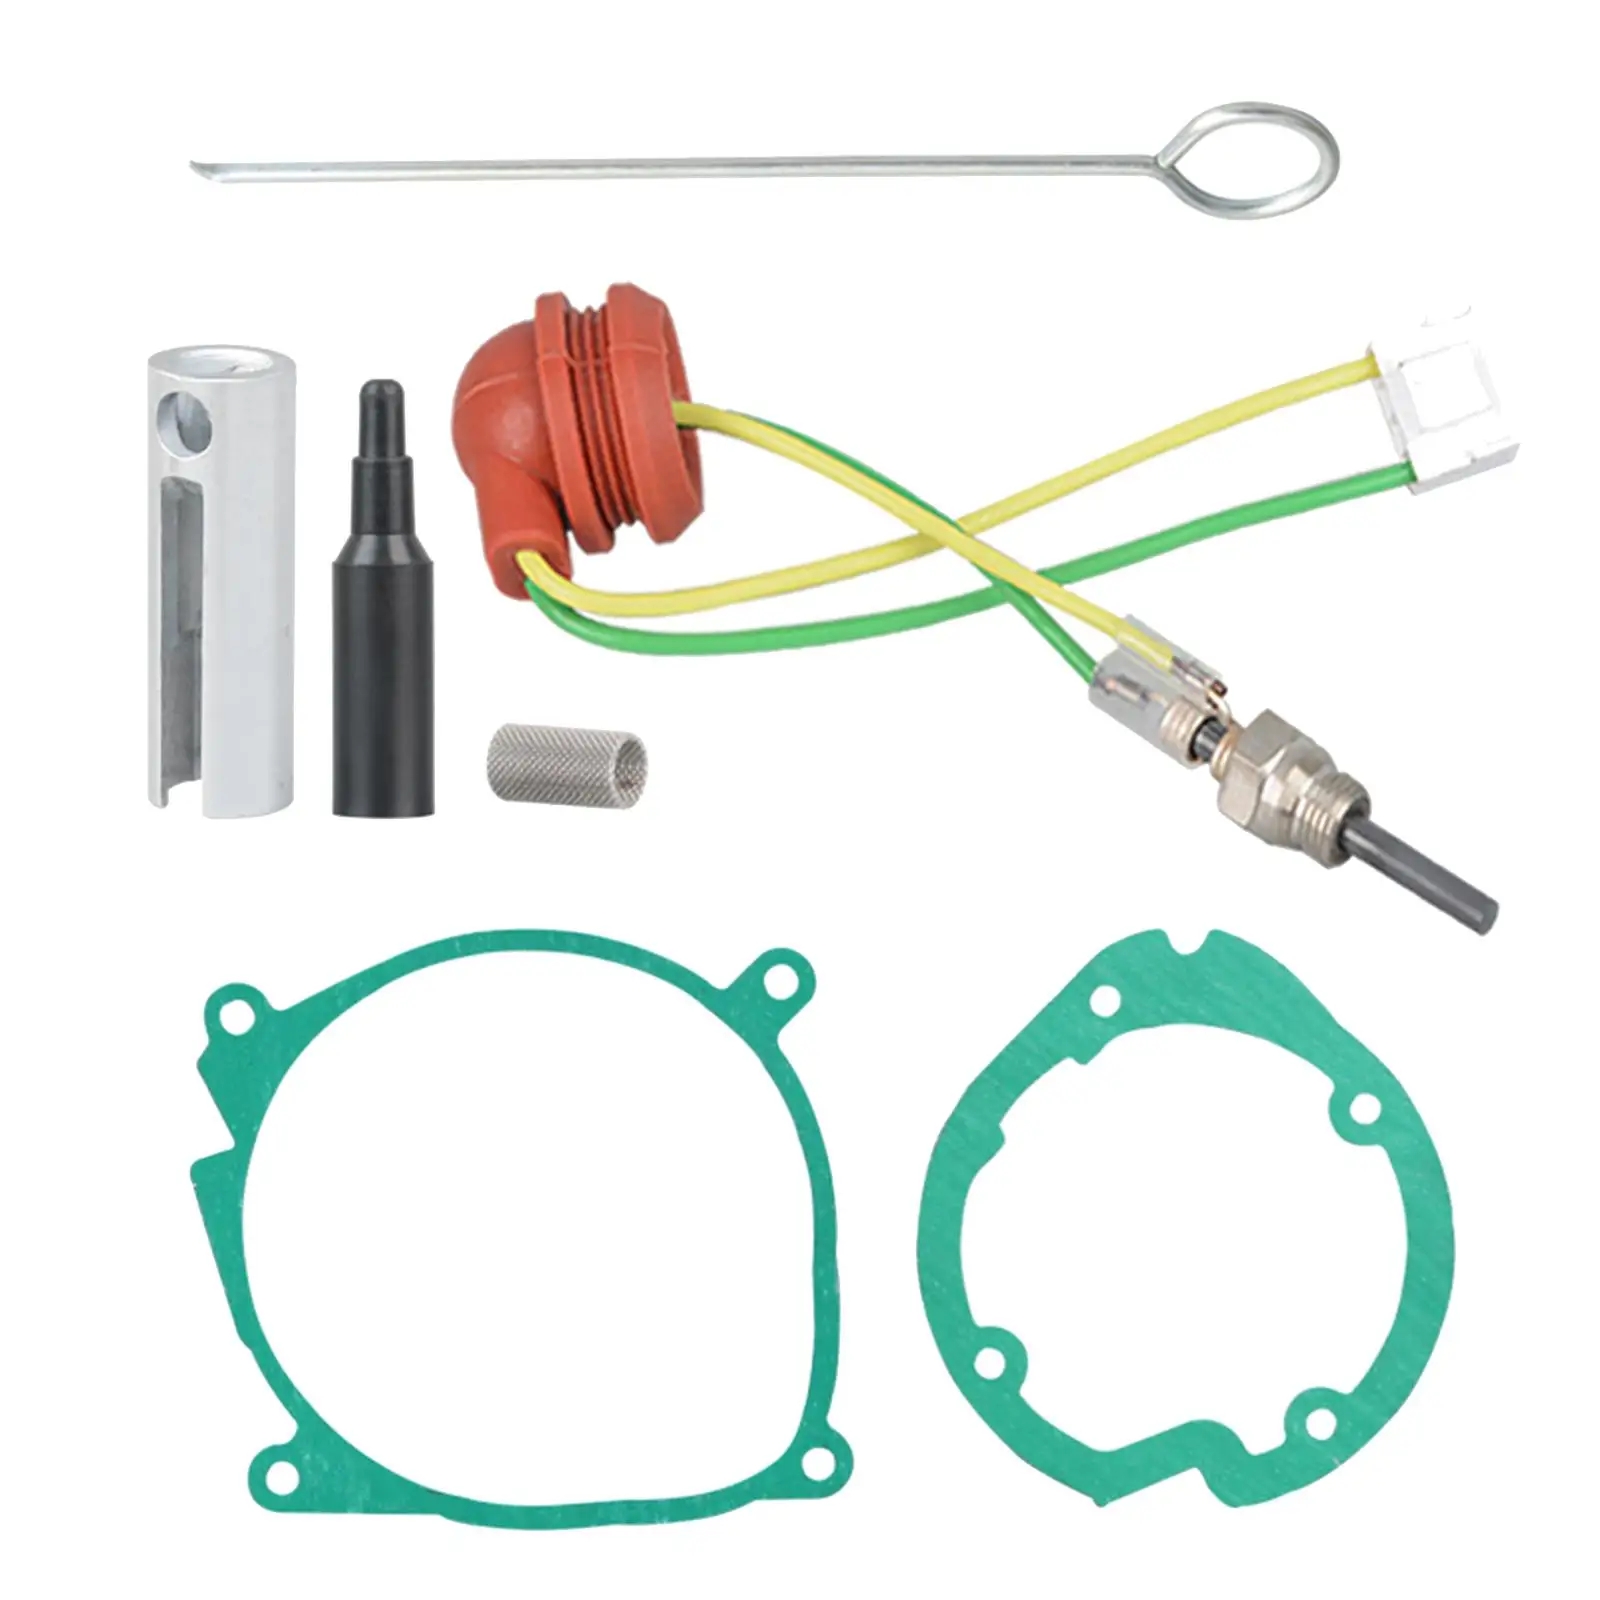 Glow Plug Repair Kit Auto Spare Parts Direct Replaces Accessory Maintenance Supplies Gasket Net for 24V 5kW Parking Heater